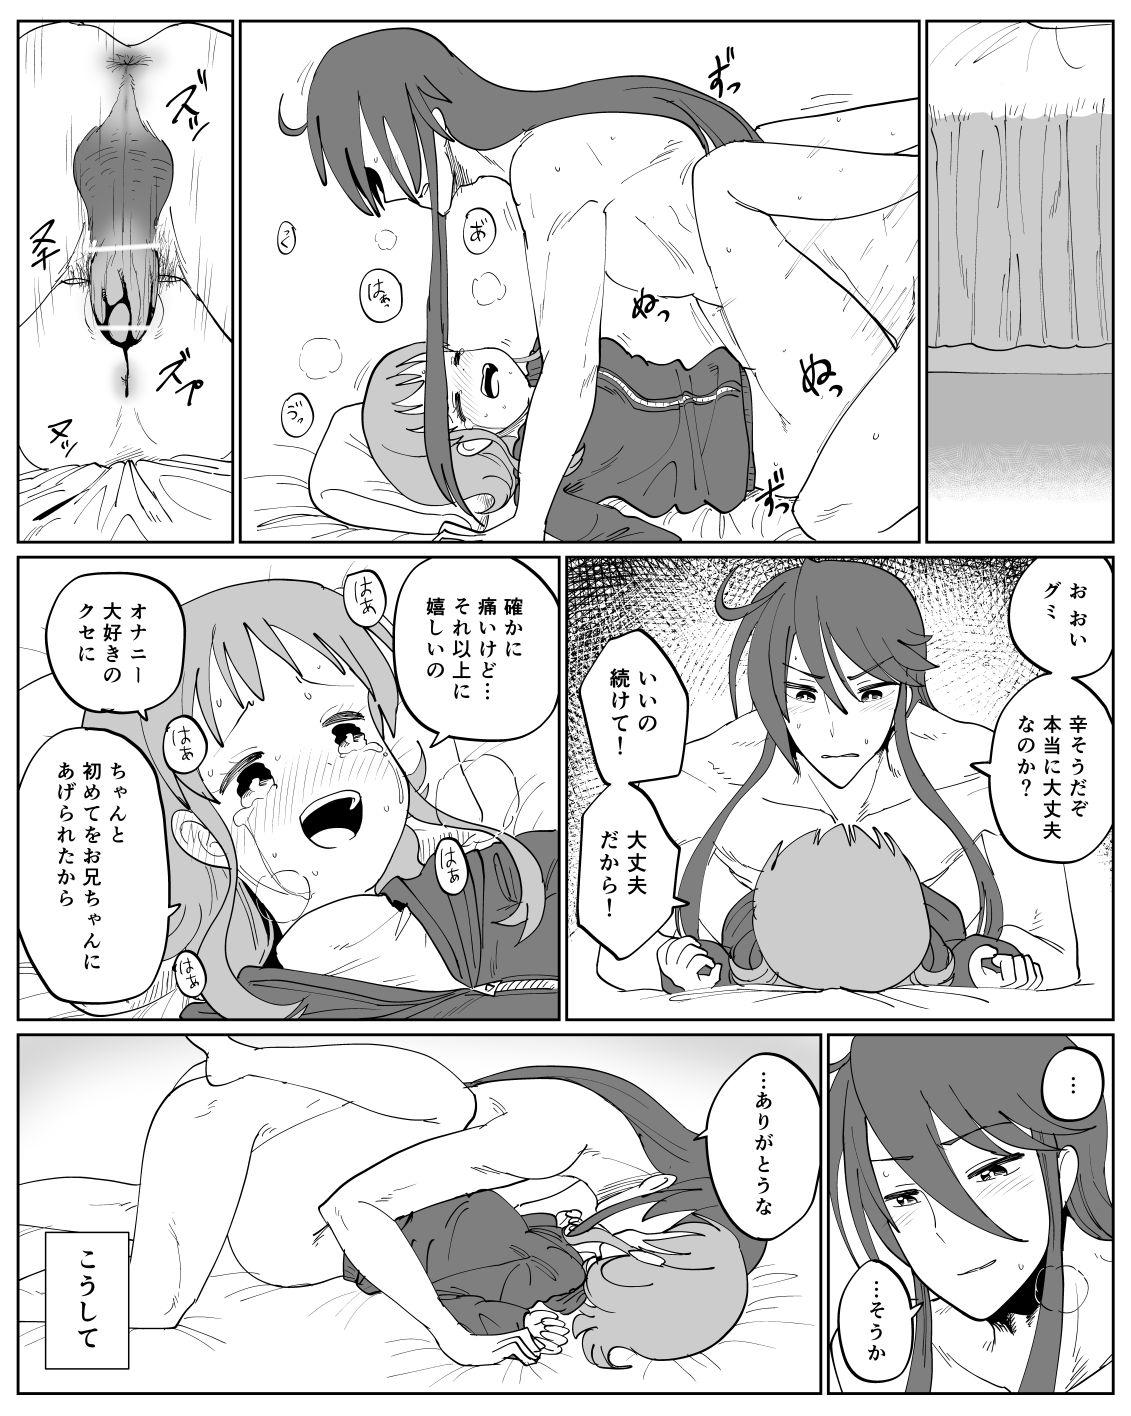 Pure 18 がくぐみぼかまんR5 - Vocaloid Ball Licking - Page 9